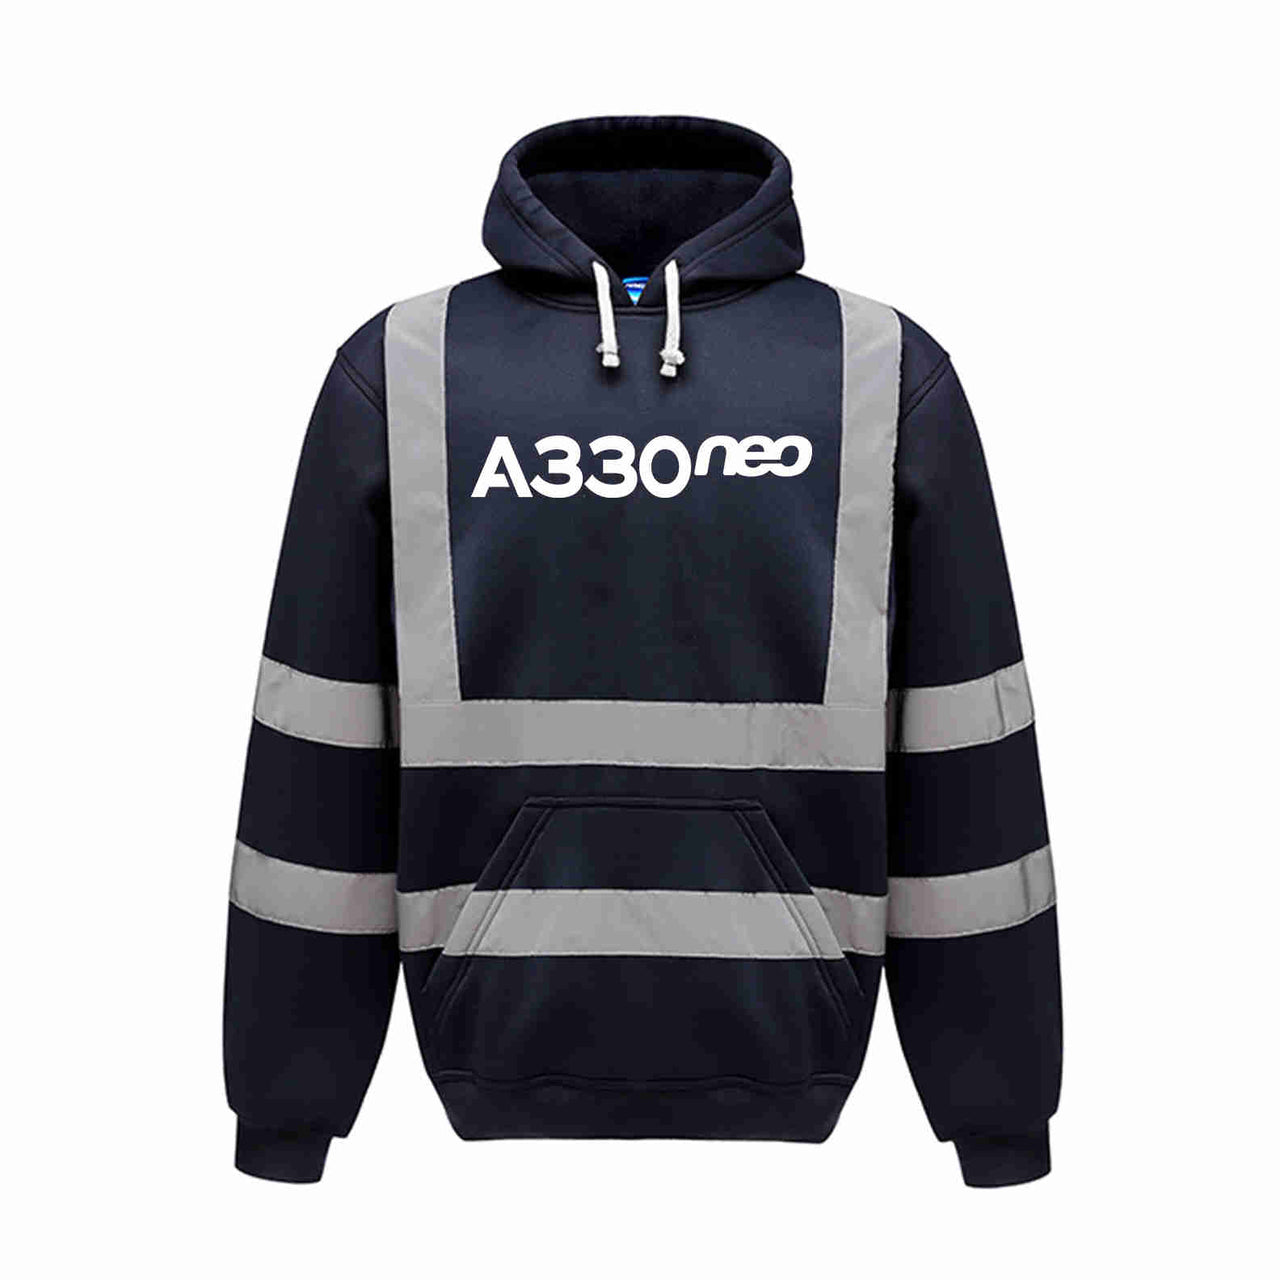 A330neo & Text Designed Reflective Hoodies